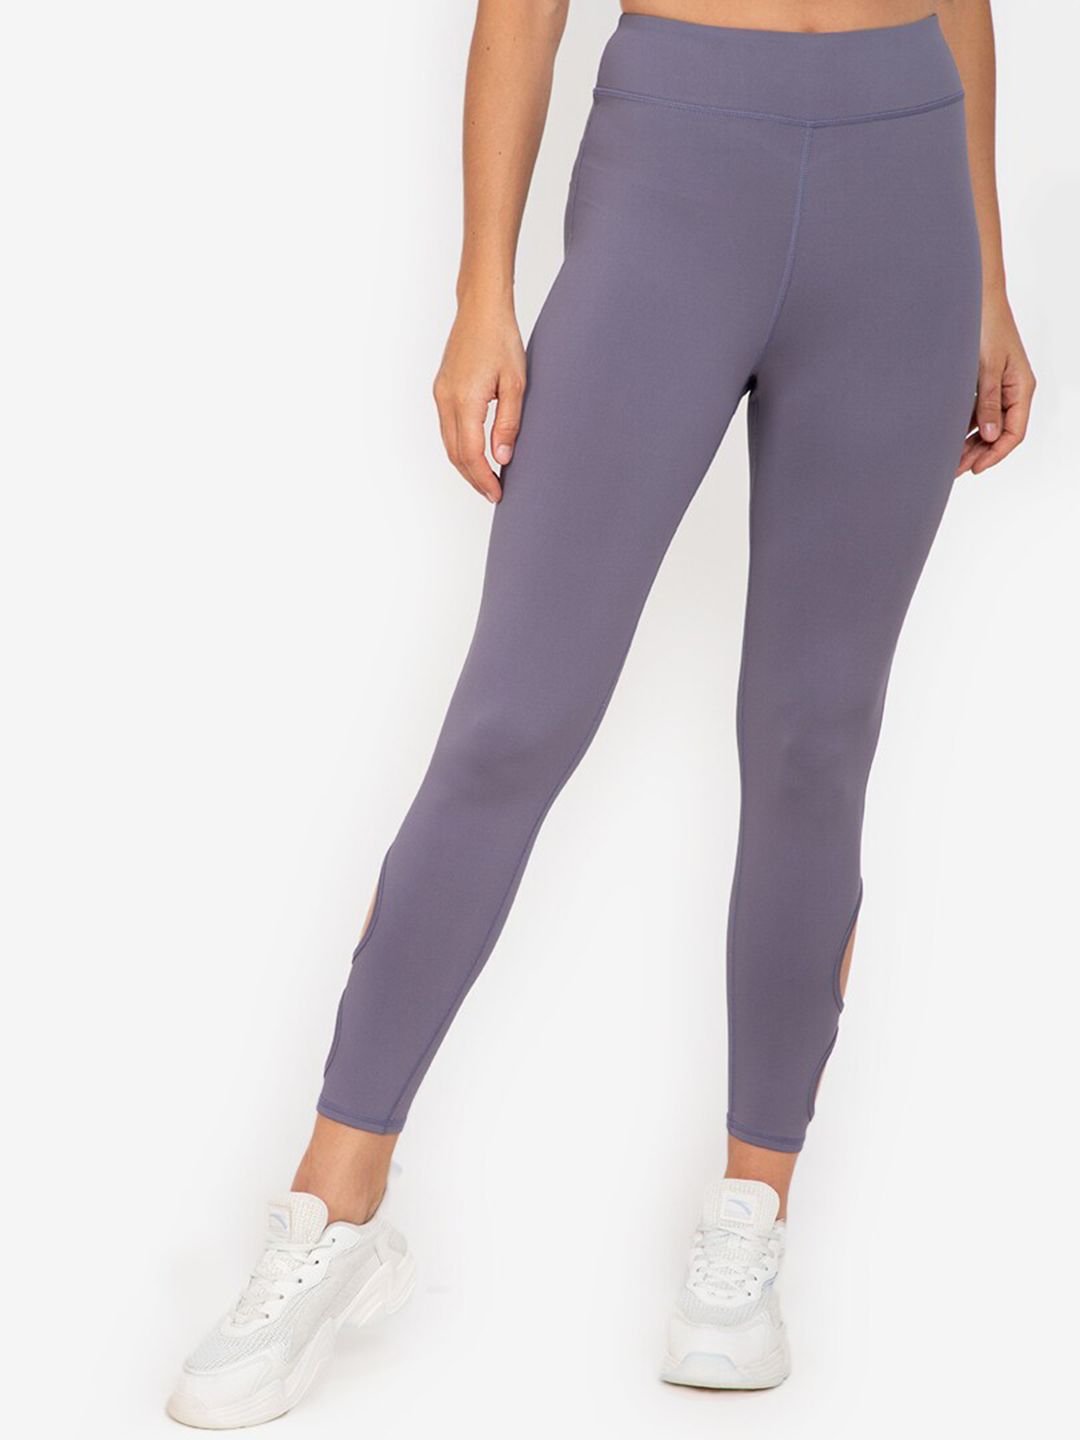 ZALORA ACTIVE Women Grey Sports Cut Out Detail Tights Price in India